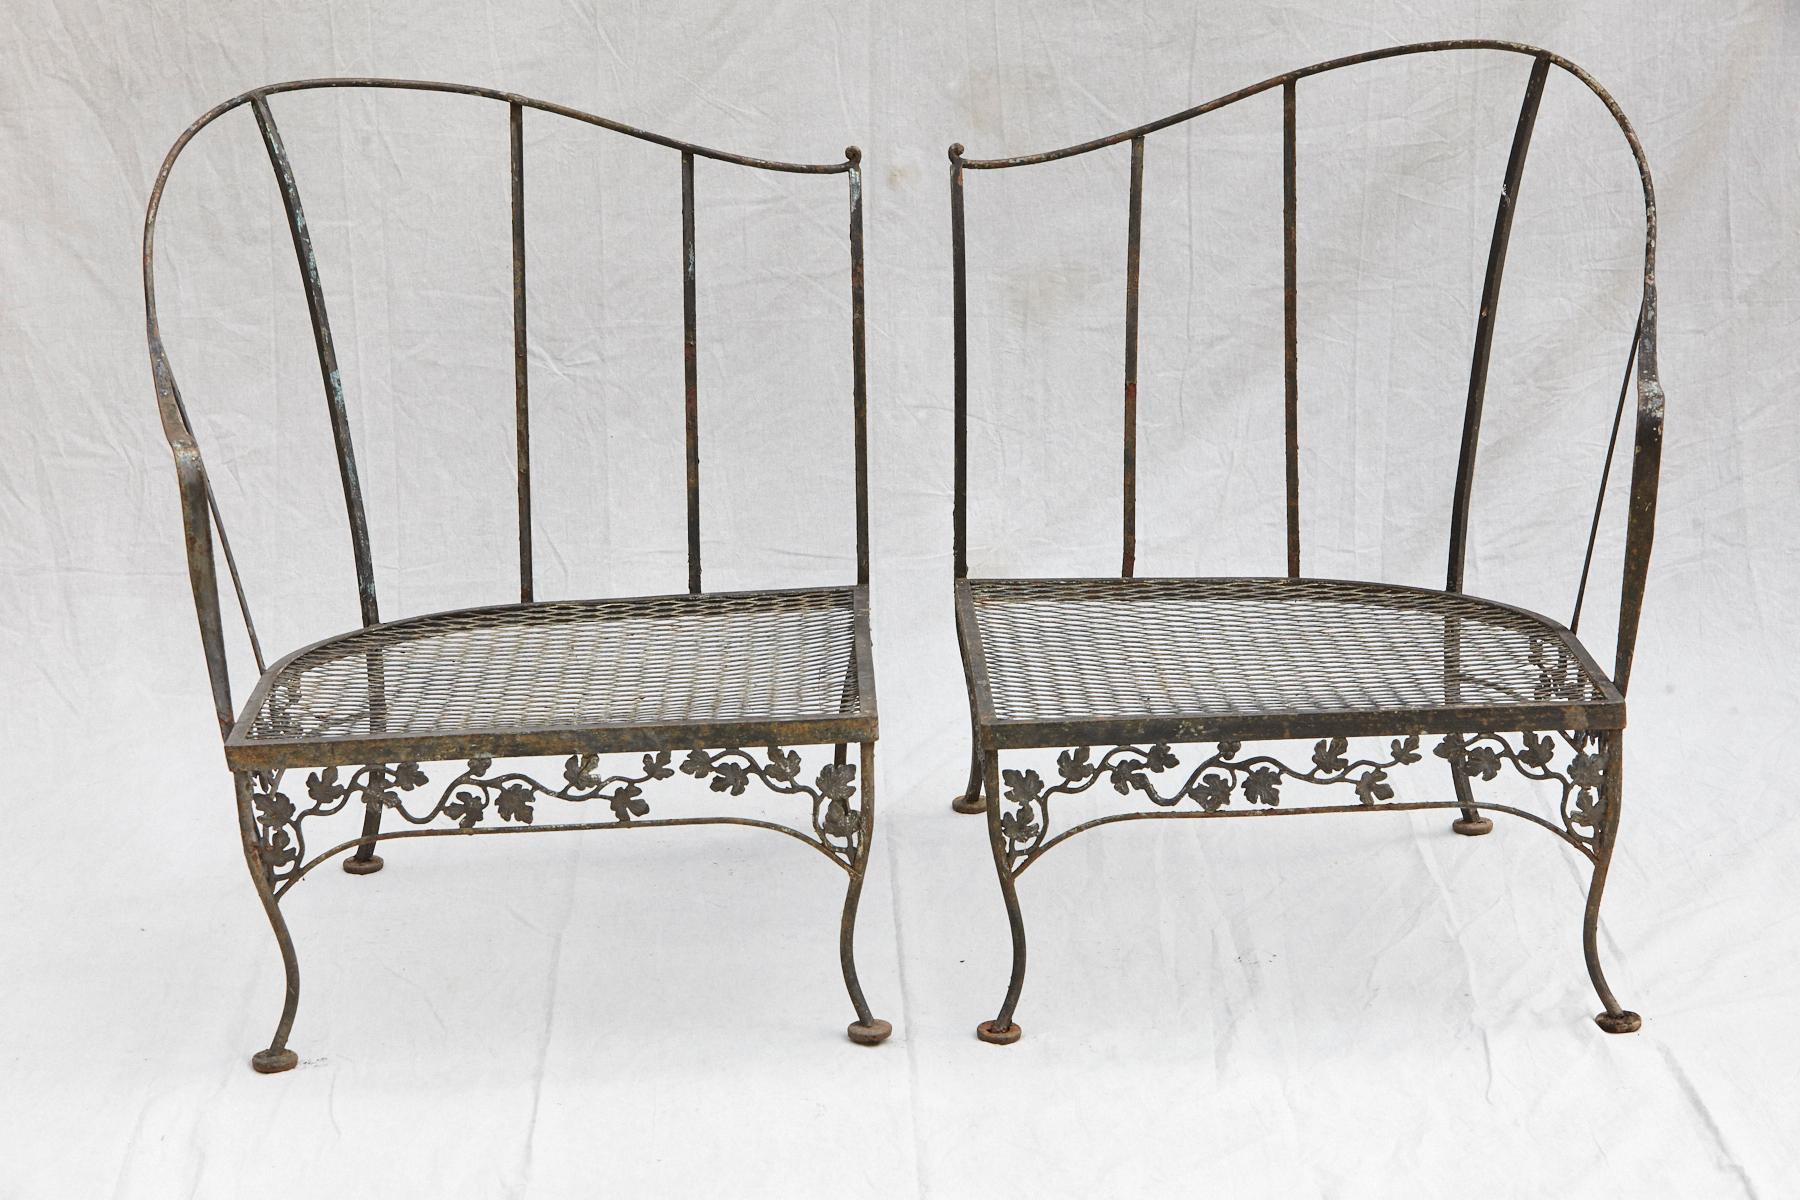 Hollywood Regency Grouping of Woodard Wrought Iron Garden Corner Chairs with Matching Side Table